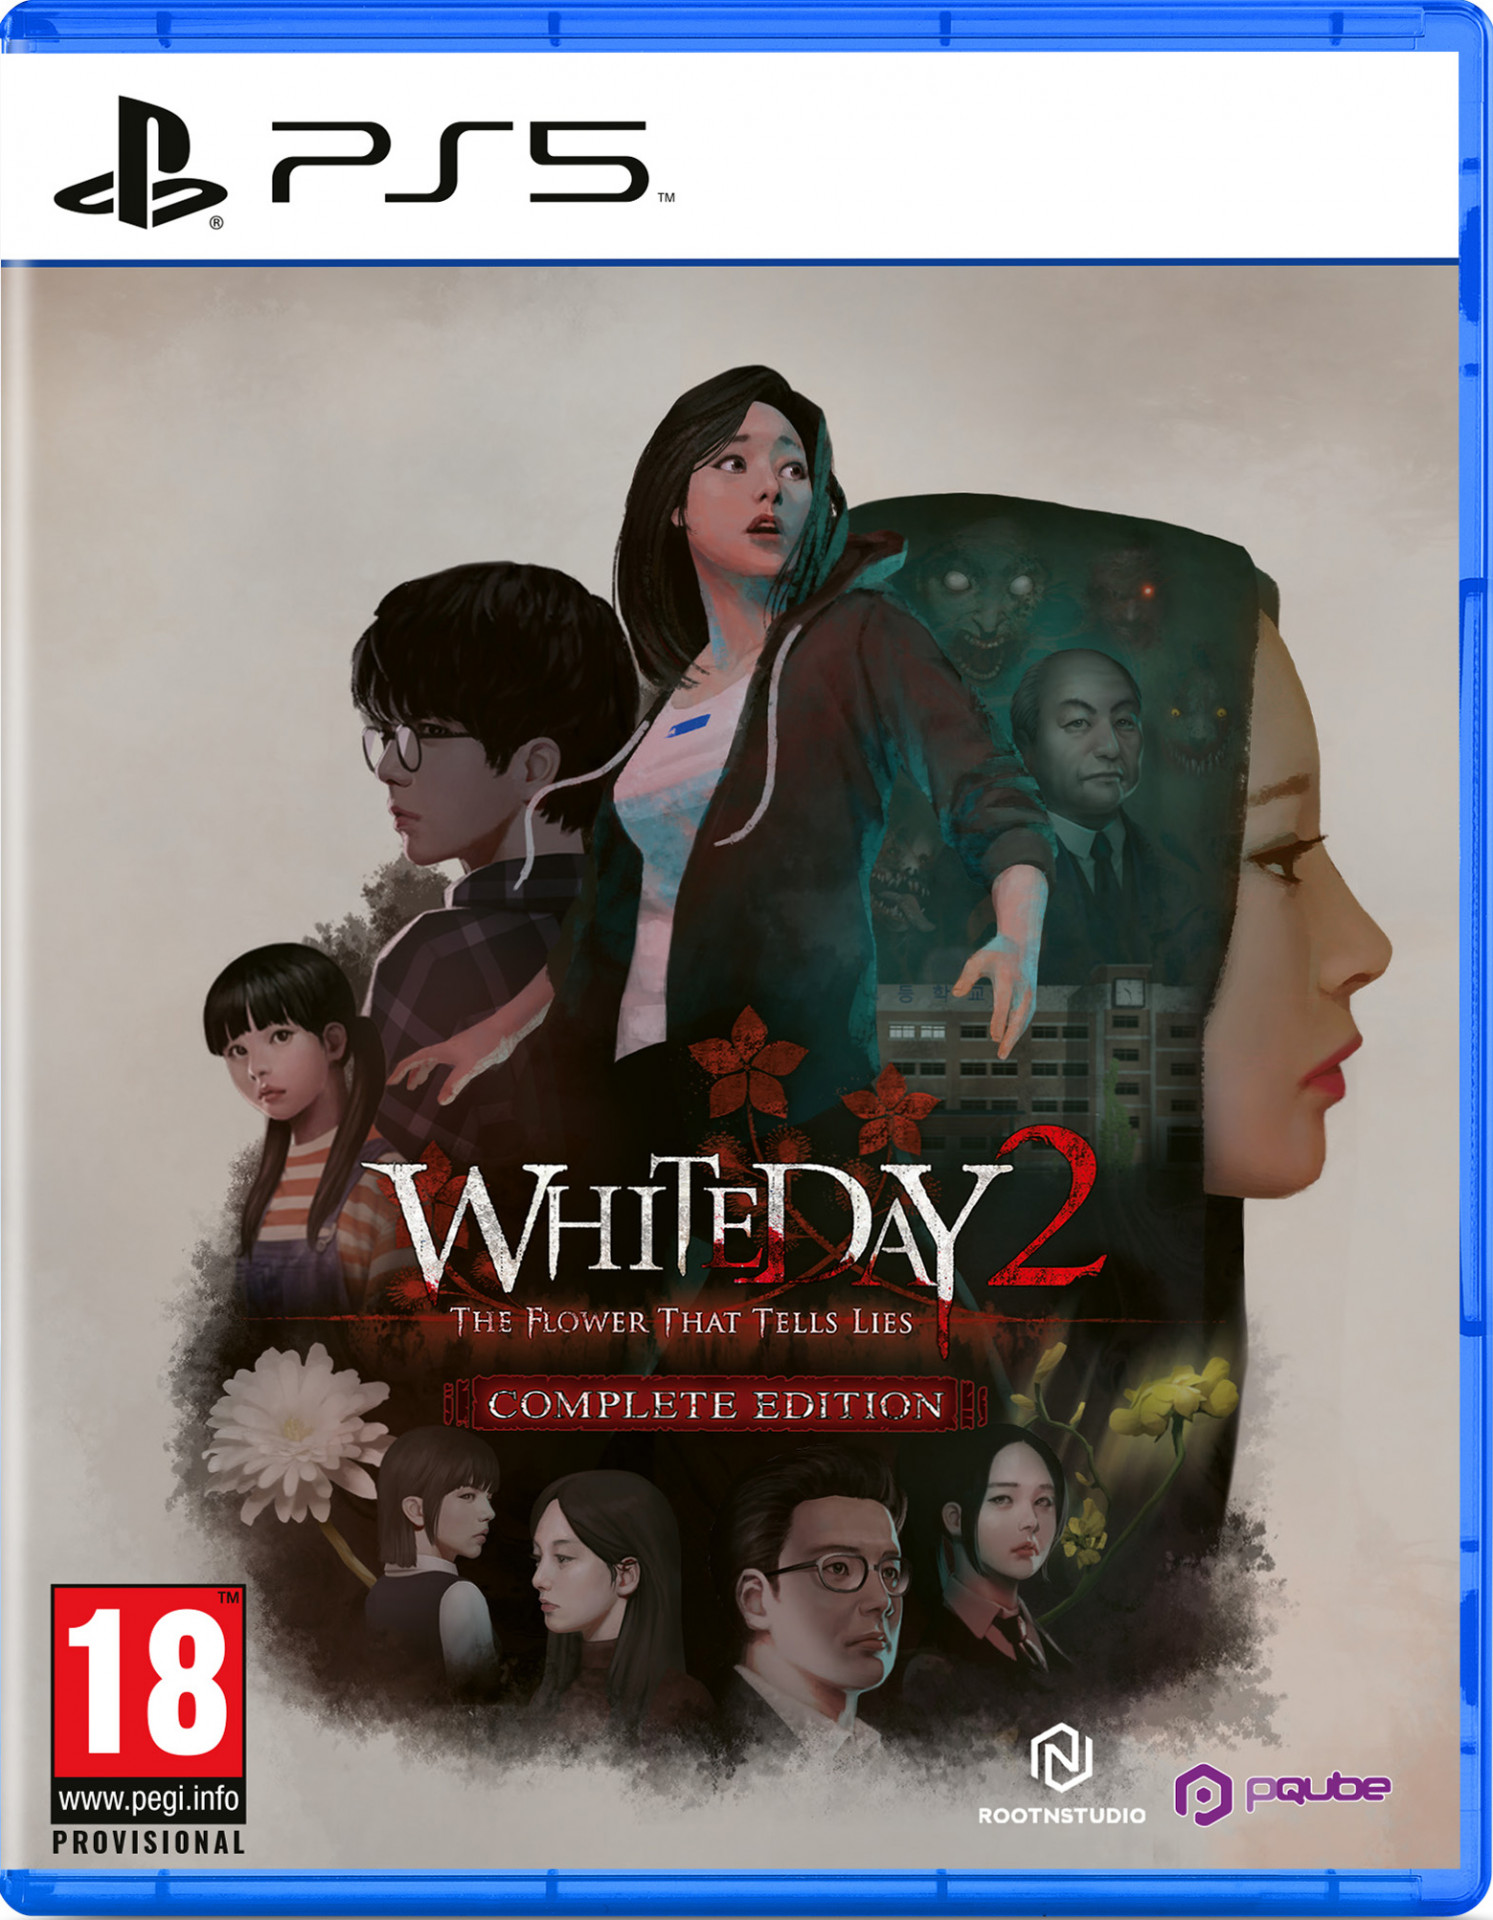 White Day 2: The Flower That Tells Lies - Complete Edition (PS5), RootNStudio LTD.